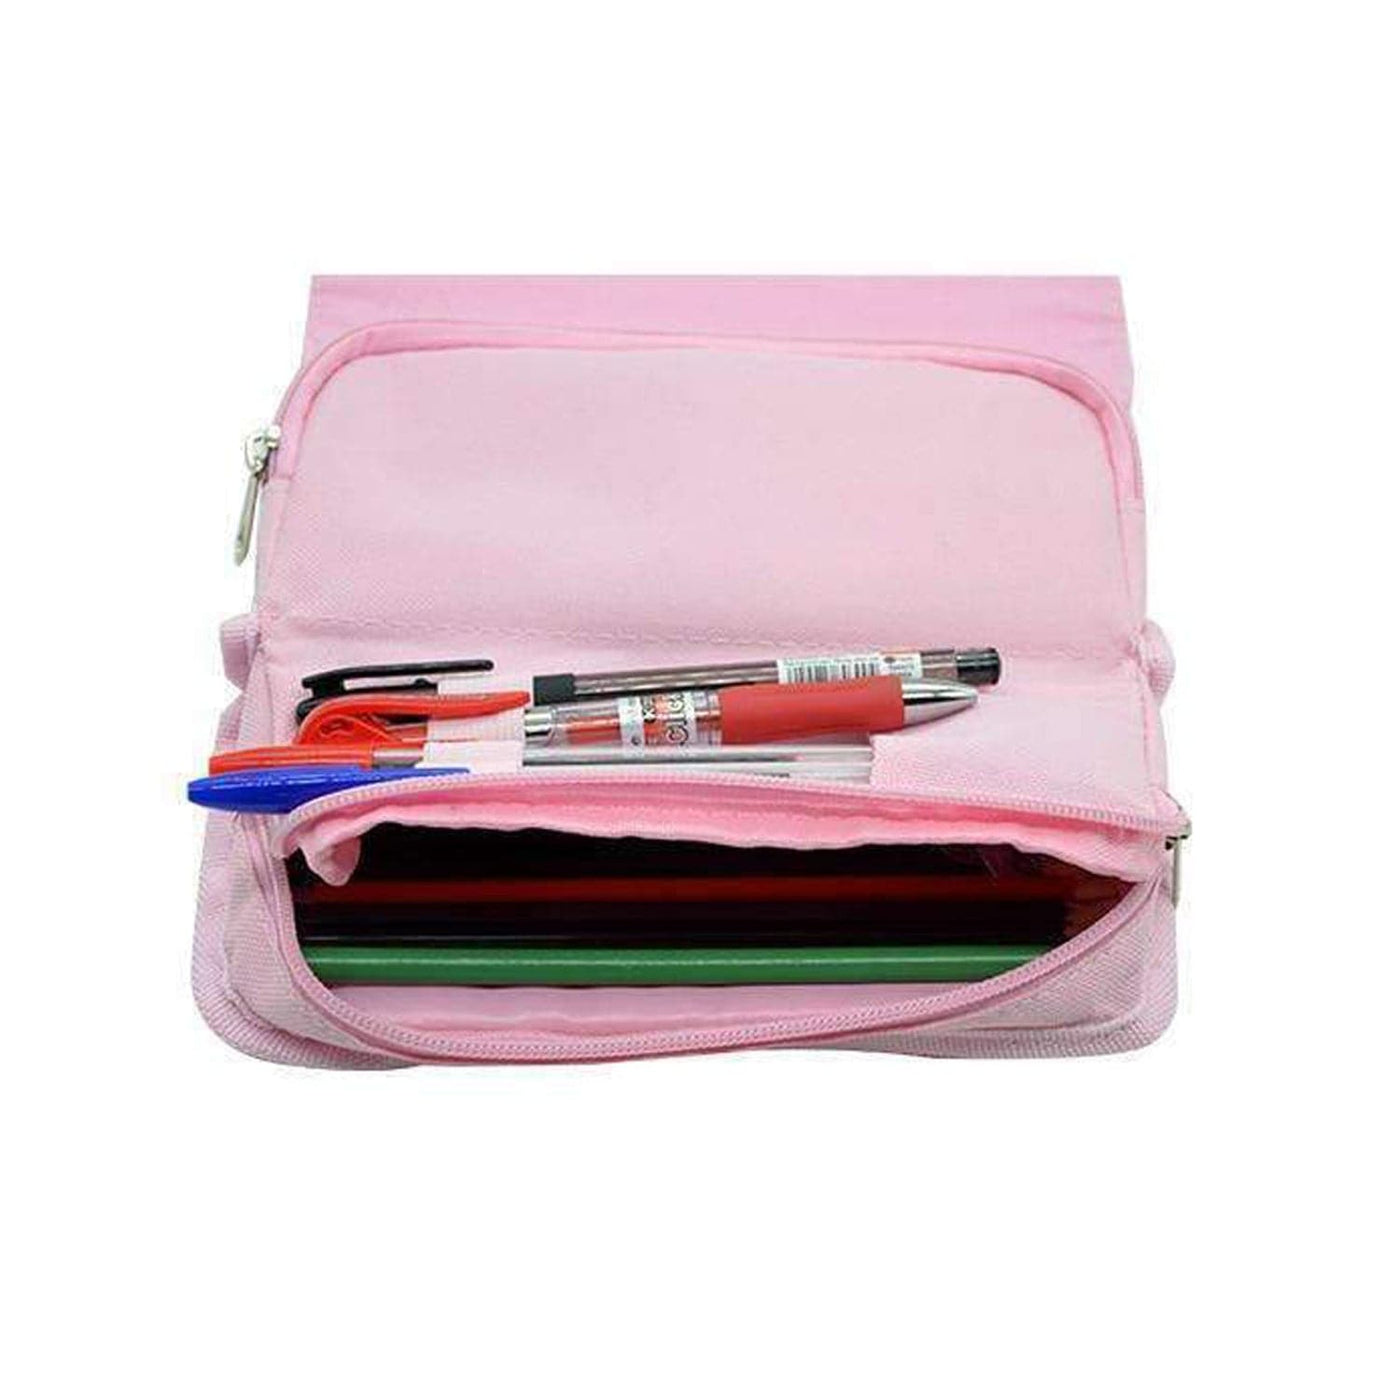 I Will Try To Fix You - White Coldplay Pencil Case